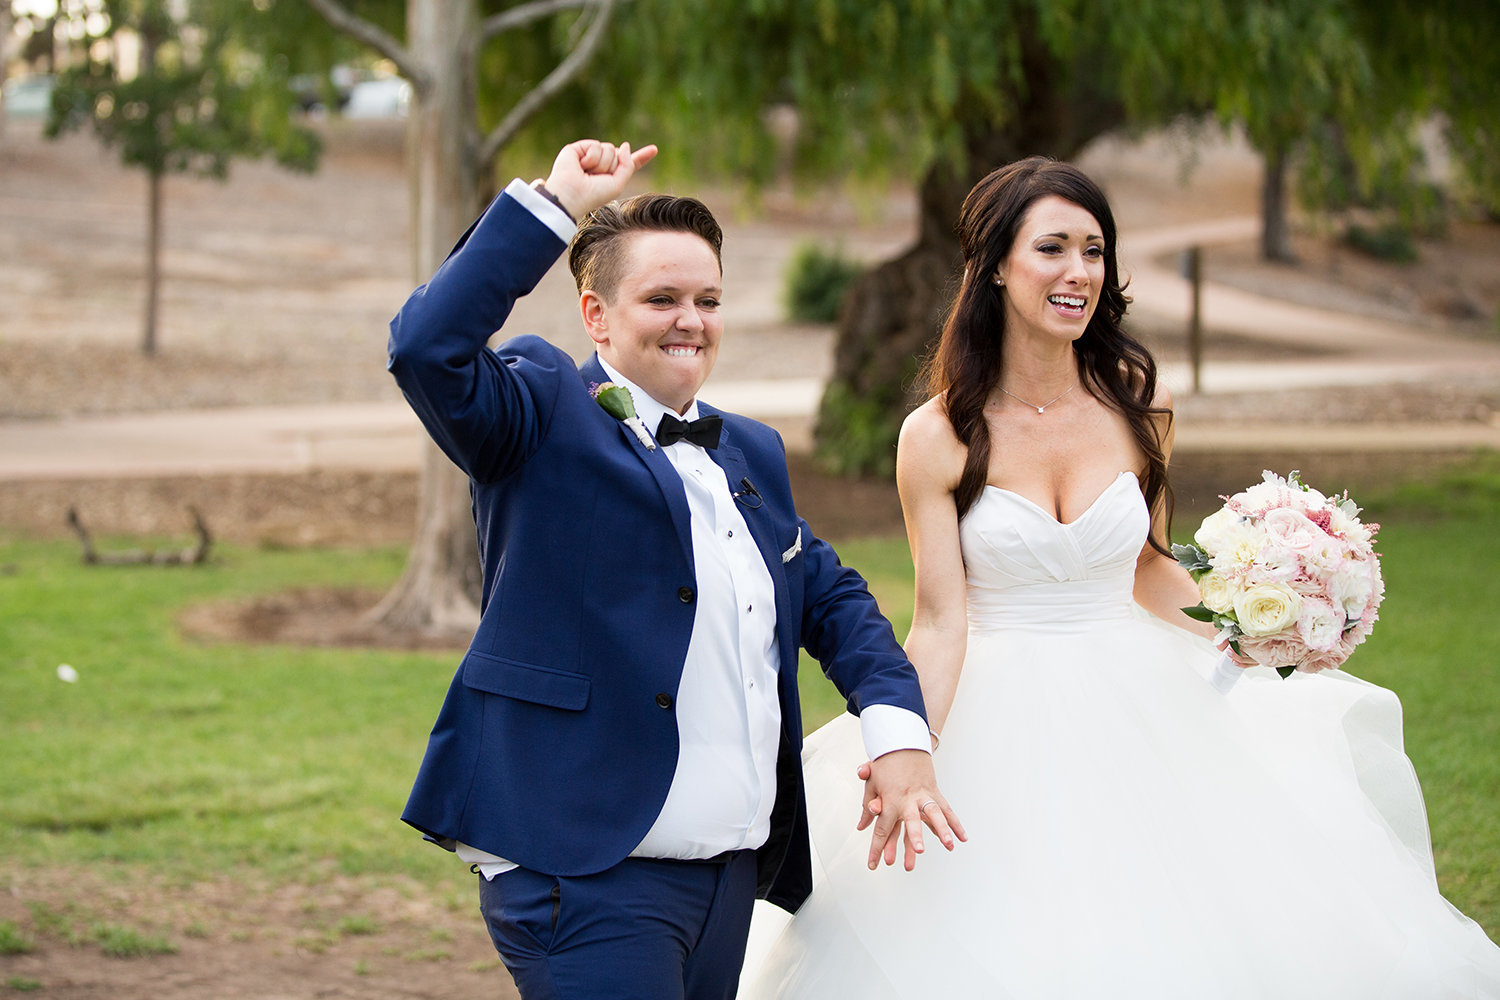 Married! Lets party.  Brides celebrate after their wedding ceremony at Balboa Park in San Diego | LGBT Wedding